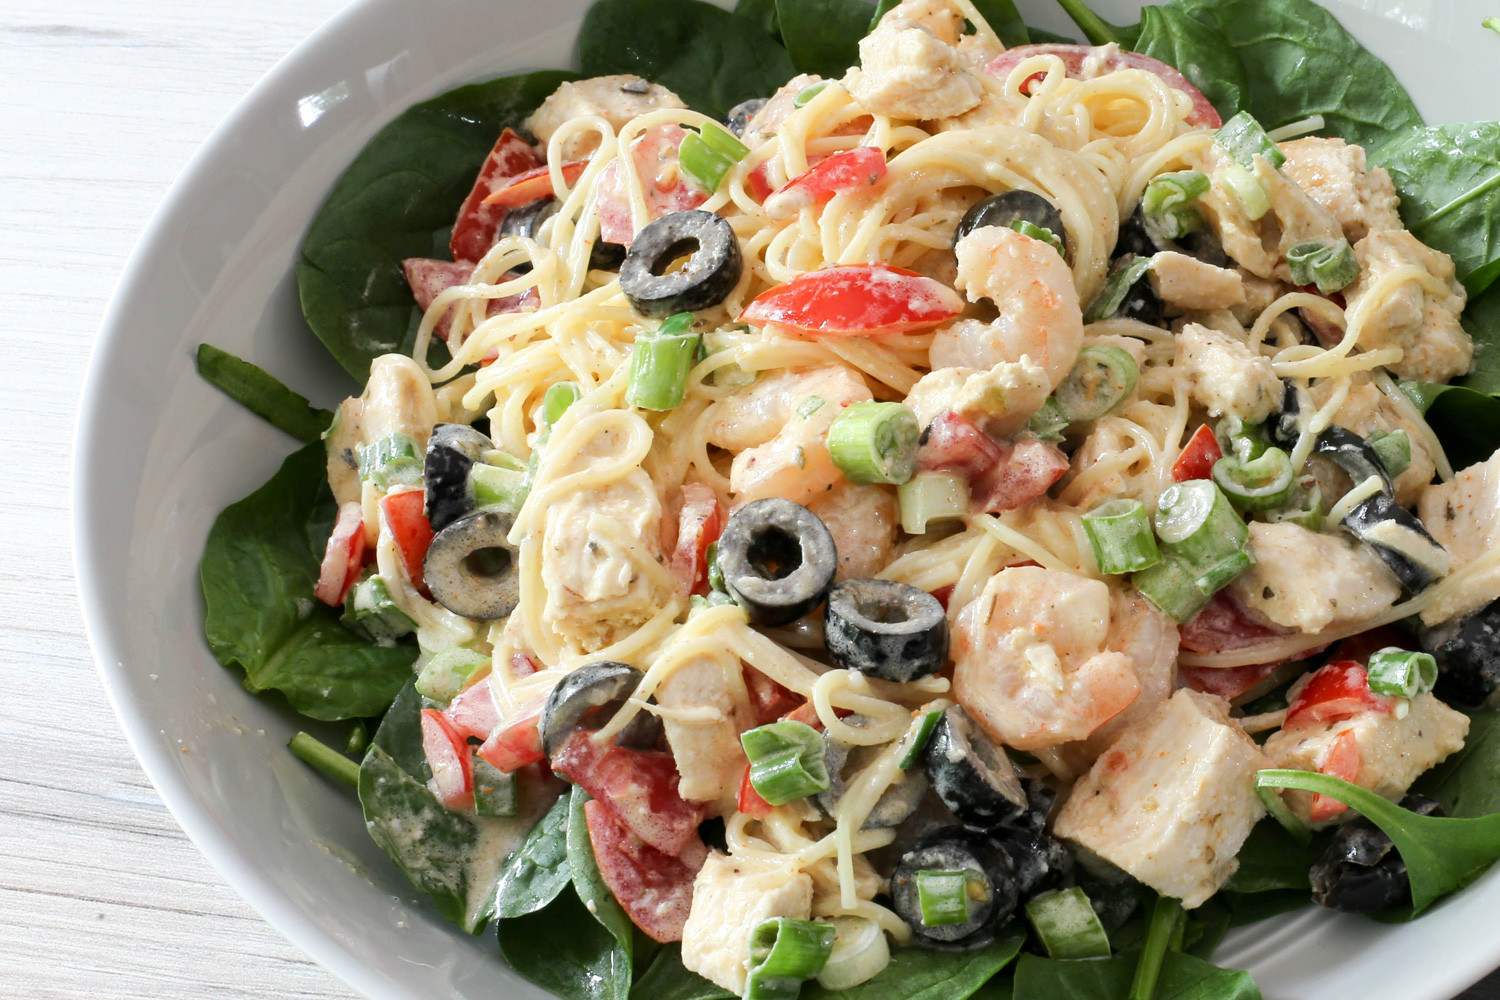 Seafood Salad Recipes Without Pasta
 Chicken and Shrimp Pasta Salad Recipe